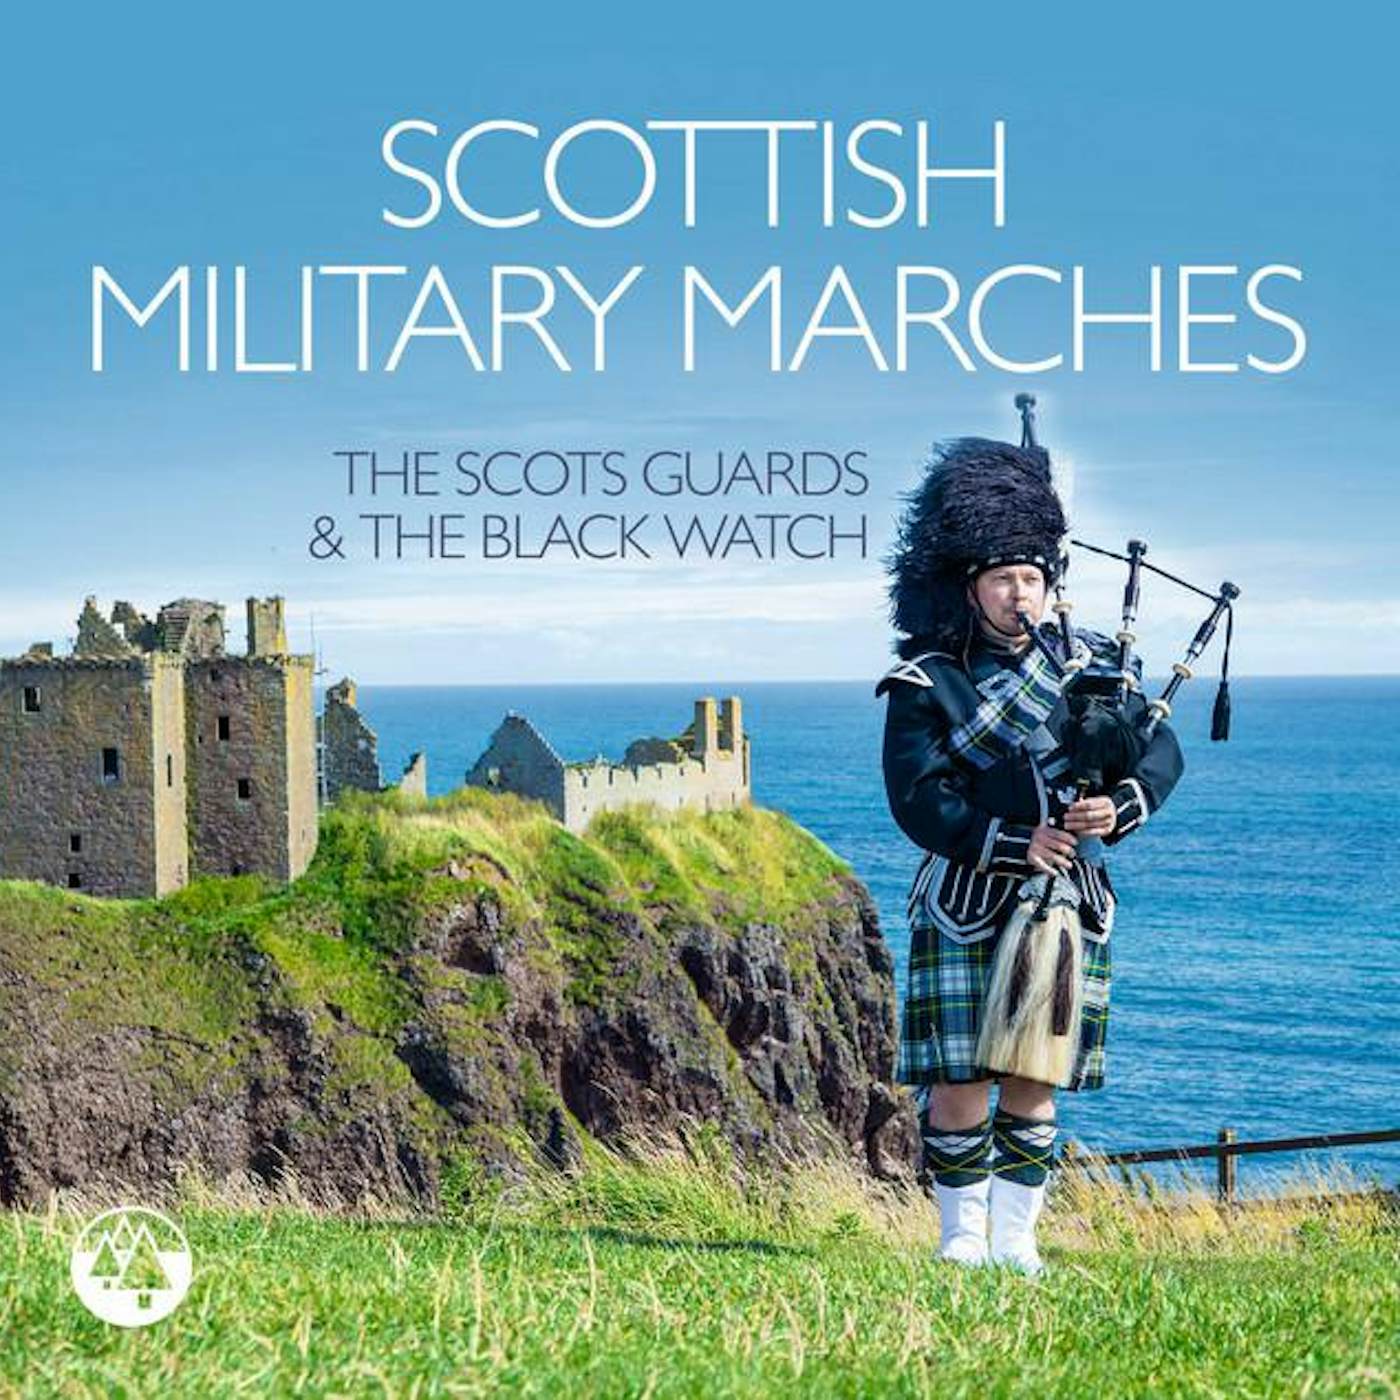 The Scots Guards